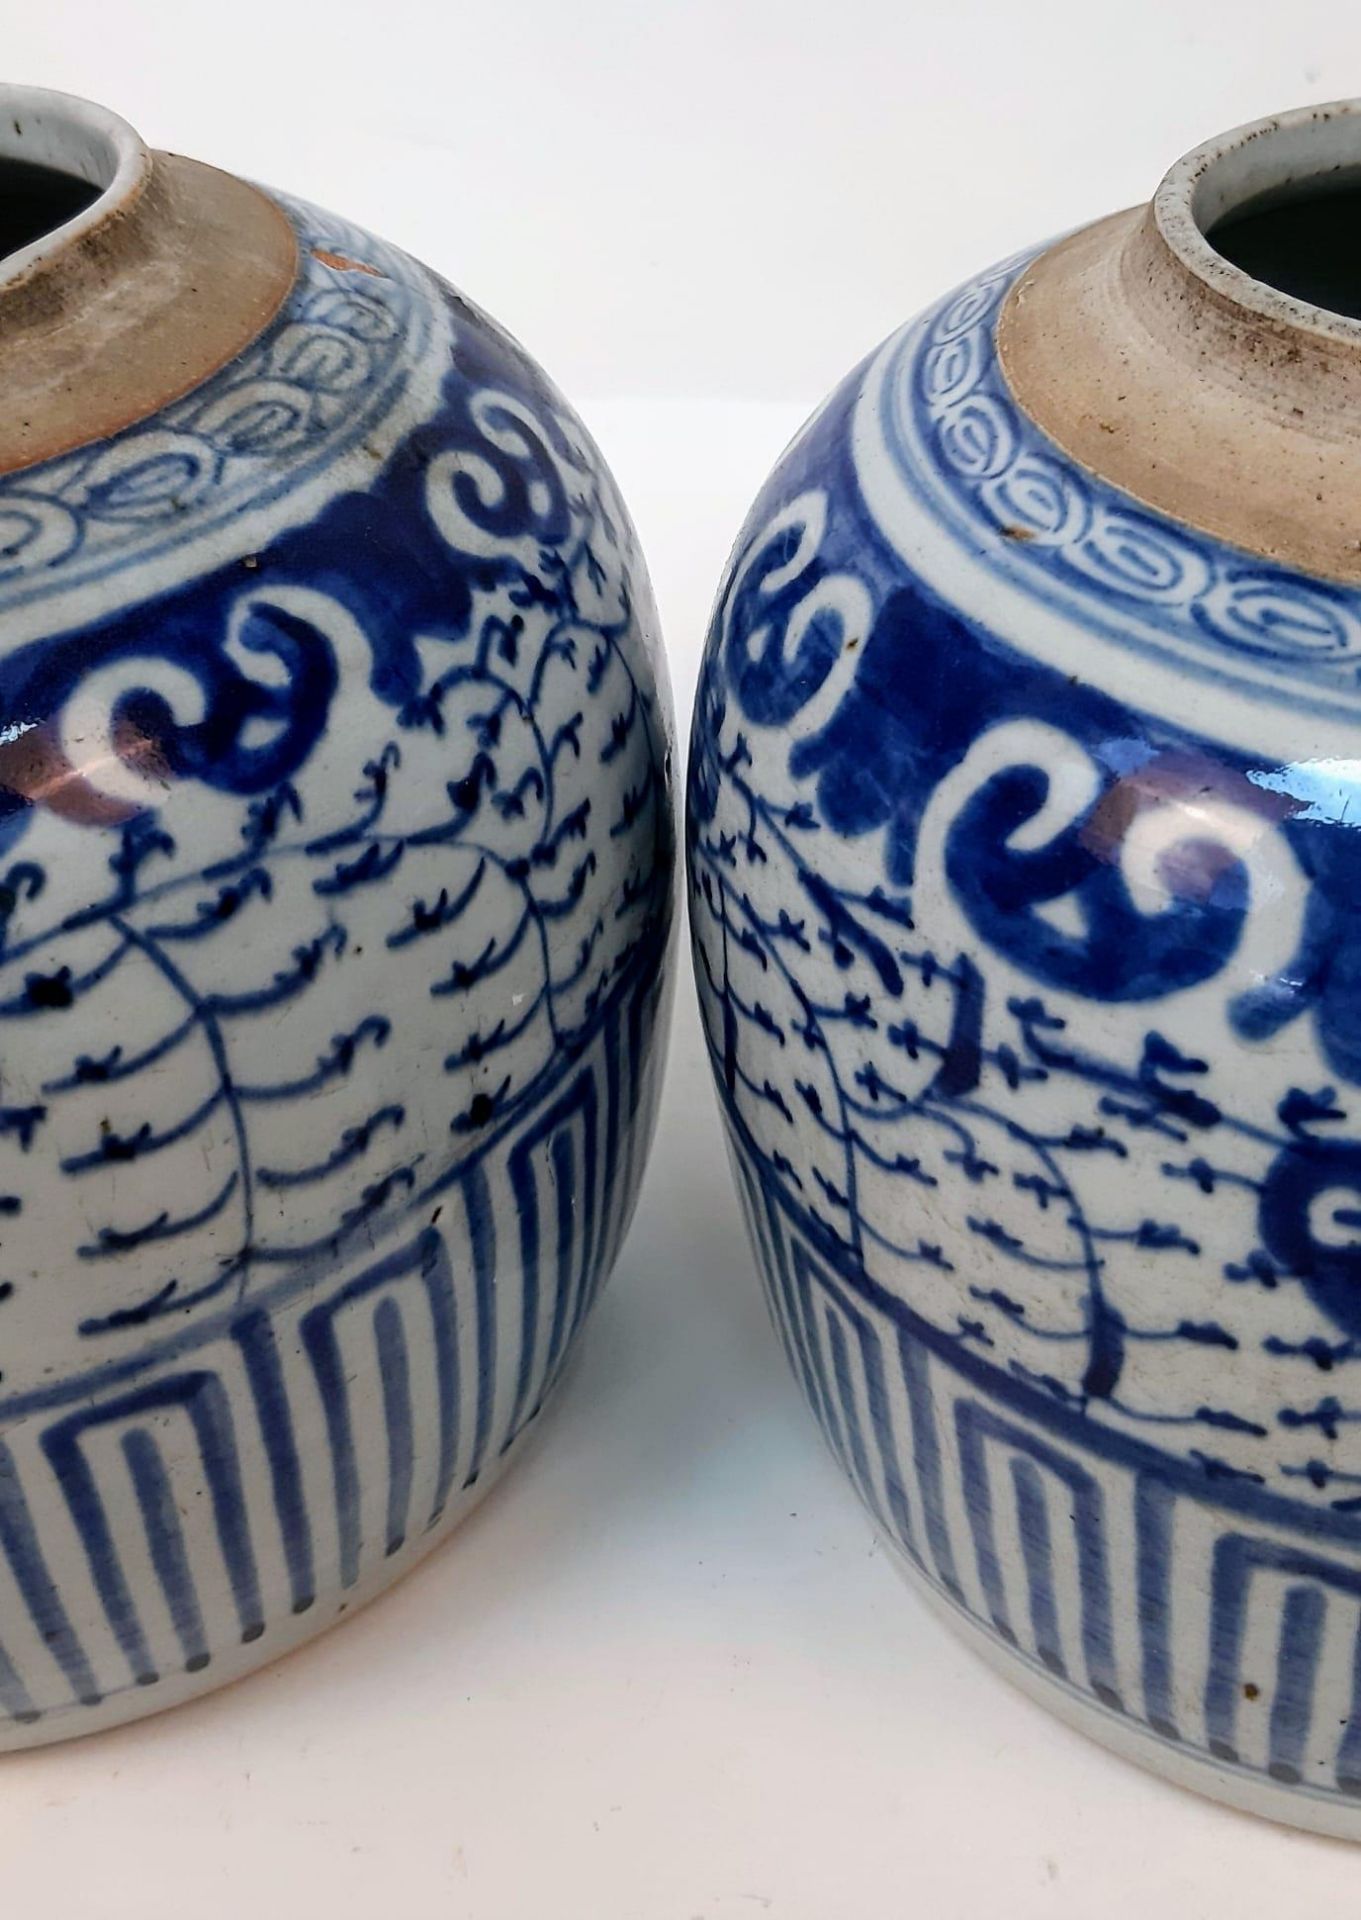 A PAIR OF LATE 19TH CENTURY BLEU GLAZED CHINESE POTS . 20cms TALL 22cms WIDTH (small chips at rim) - Image 3 of 4